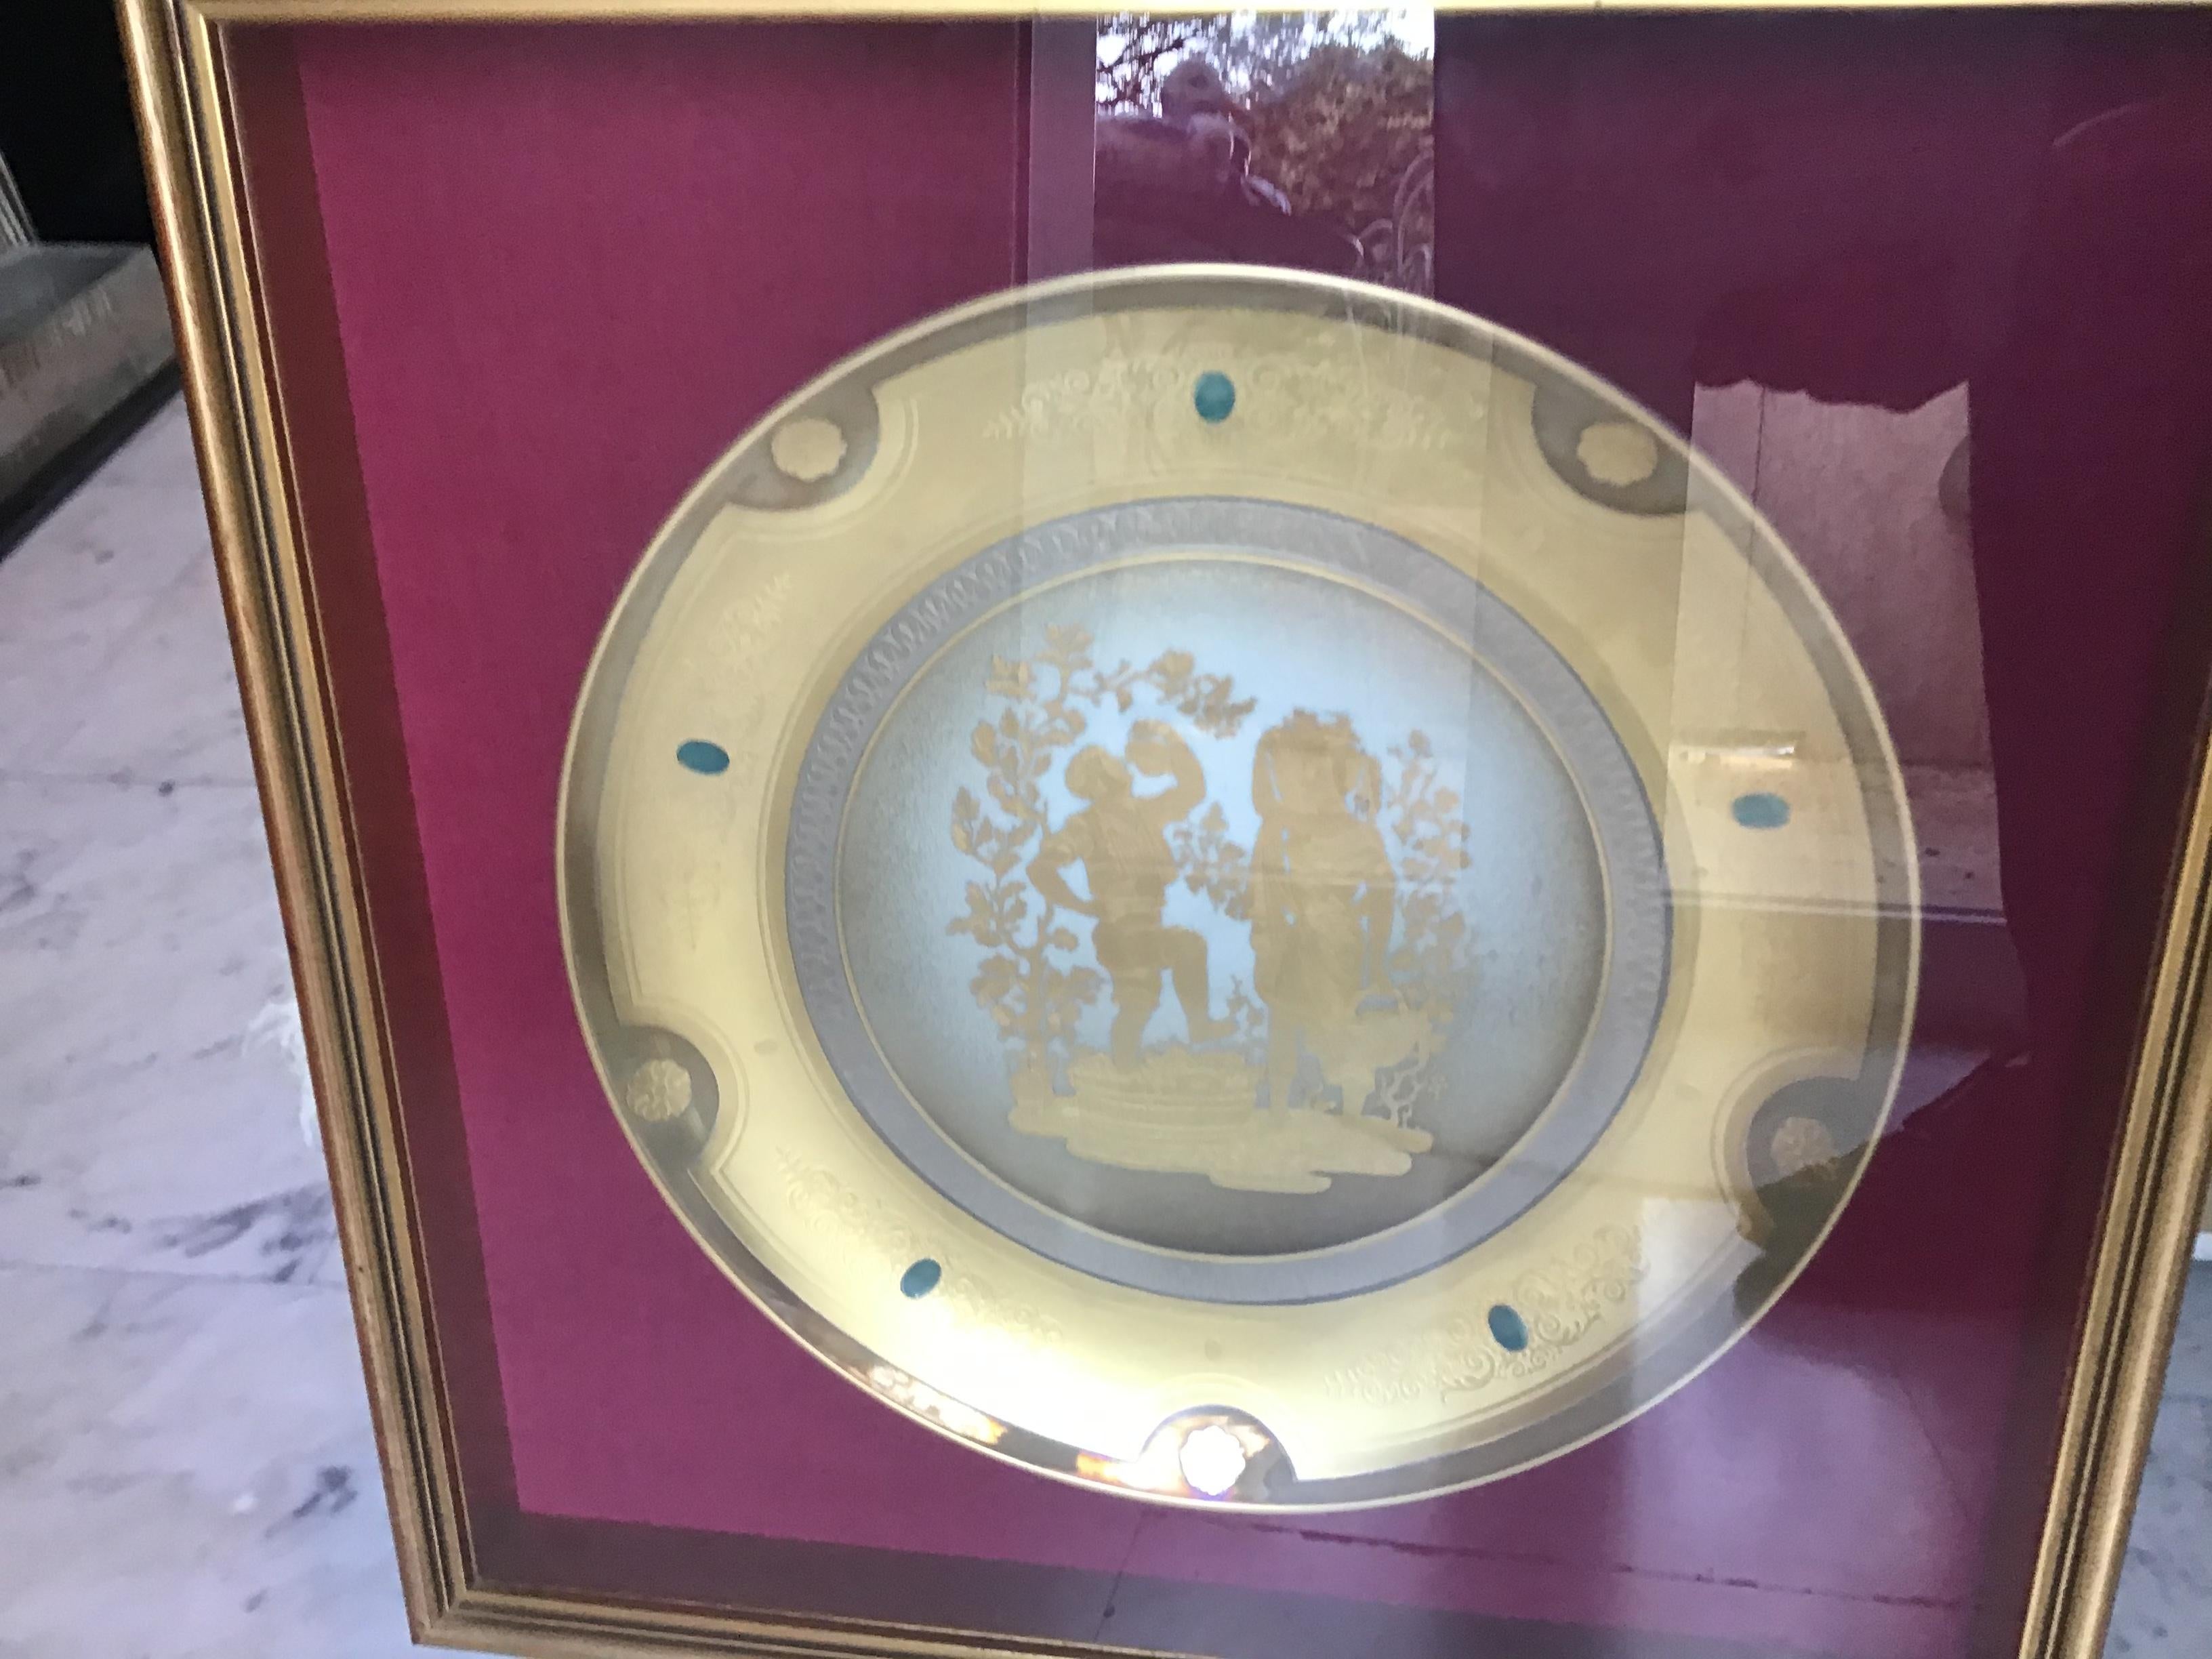 Morbelli Porcelain Wall Plate “The Harvest” Worked with Pure Gold, 1960, Italy For Sale 3